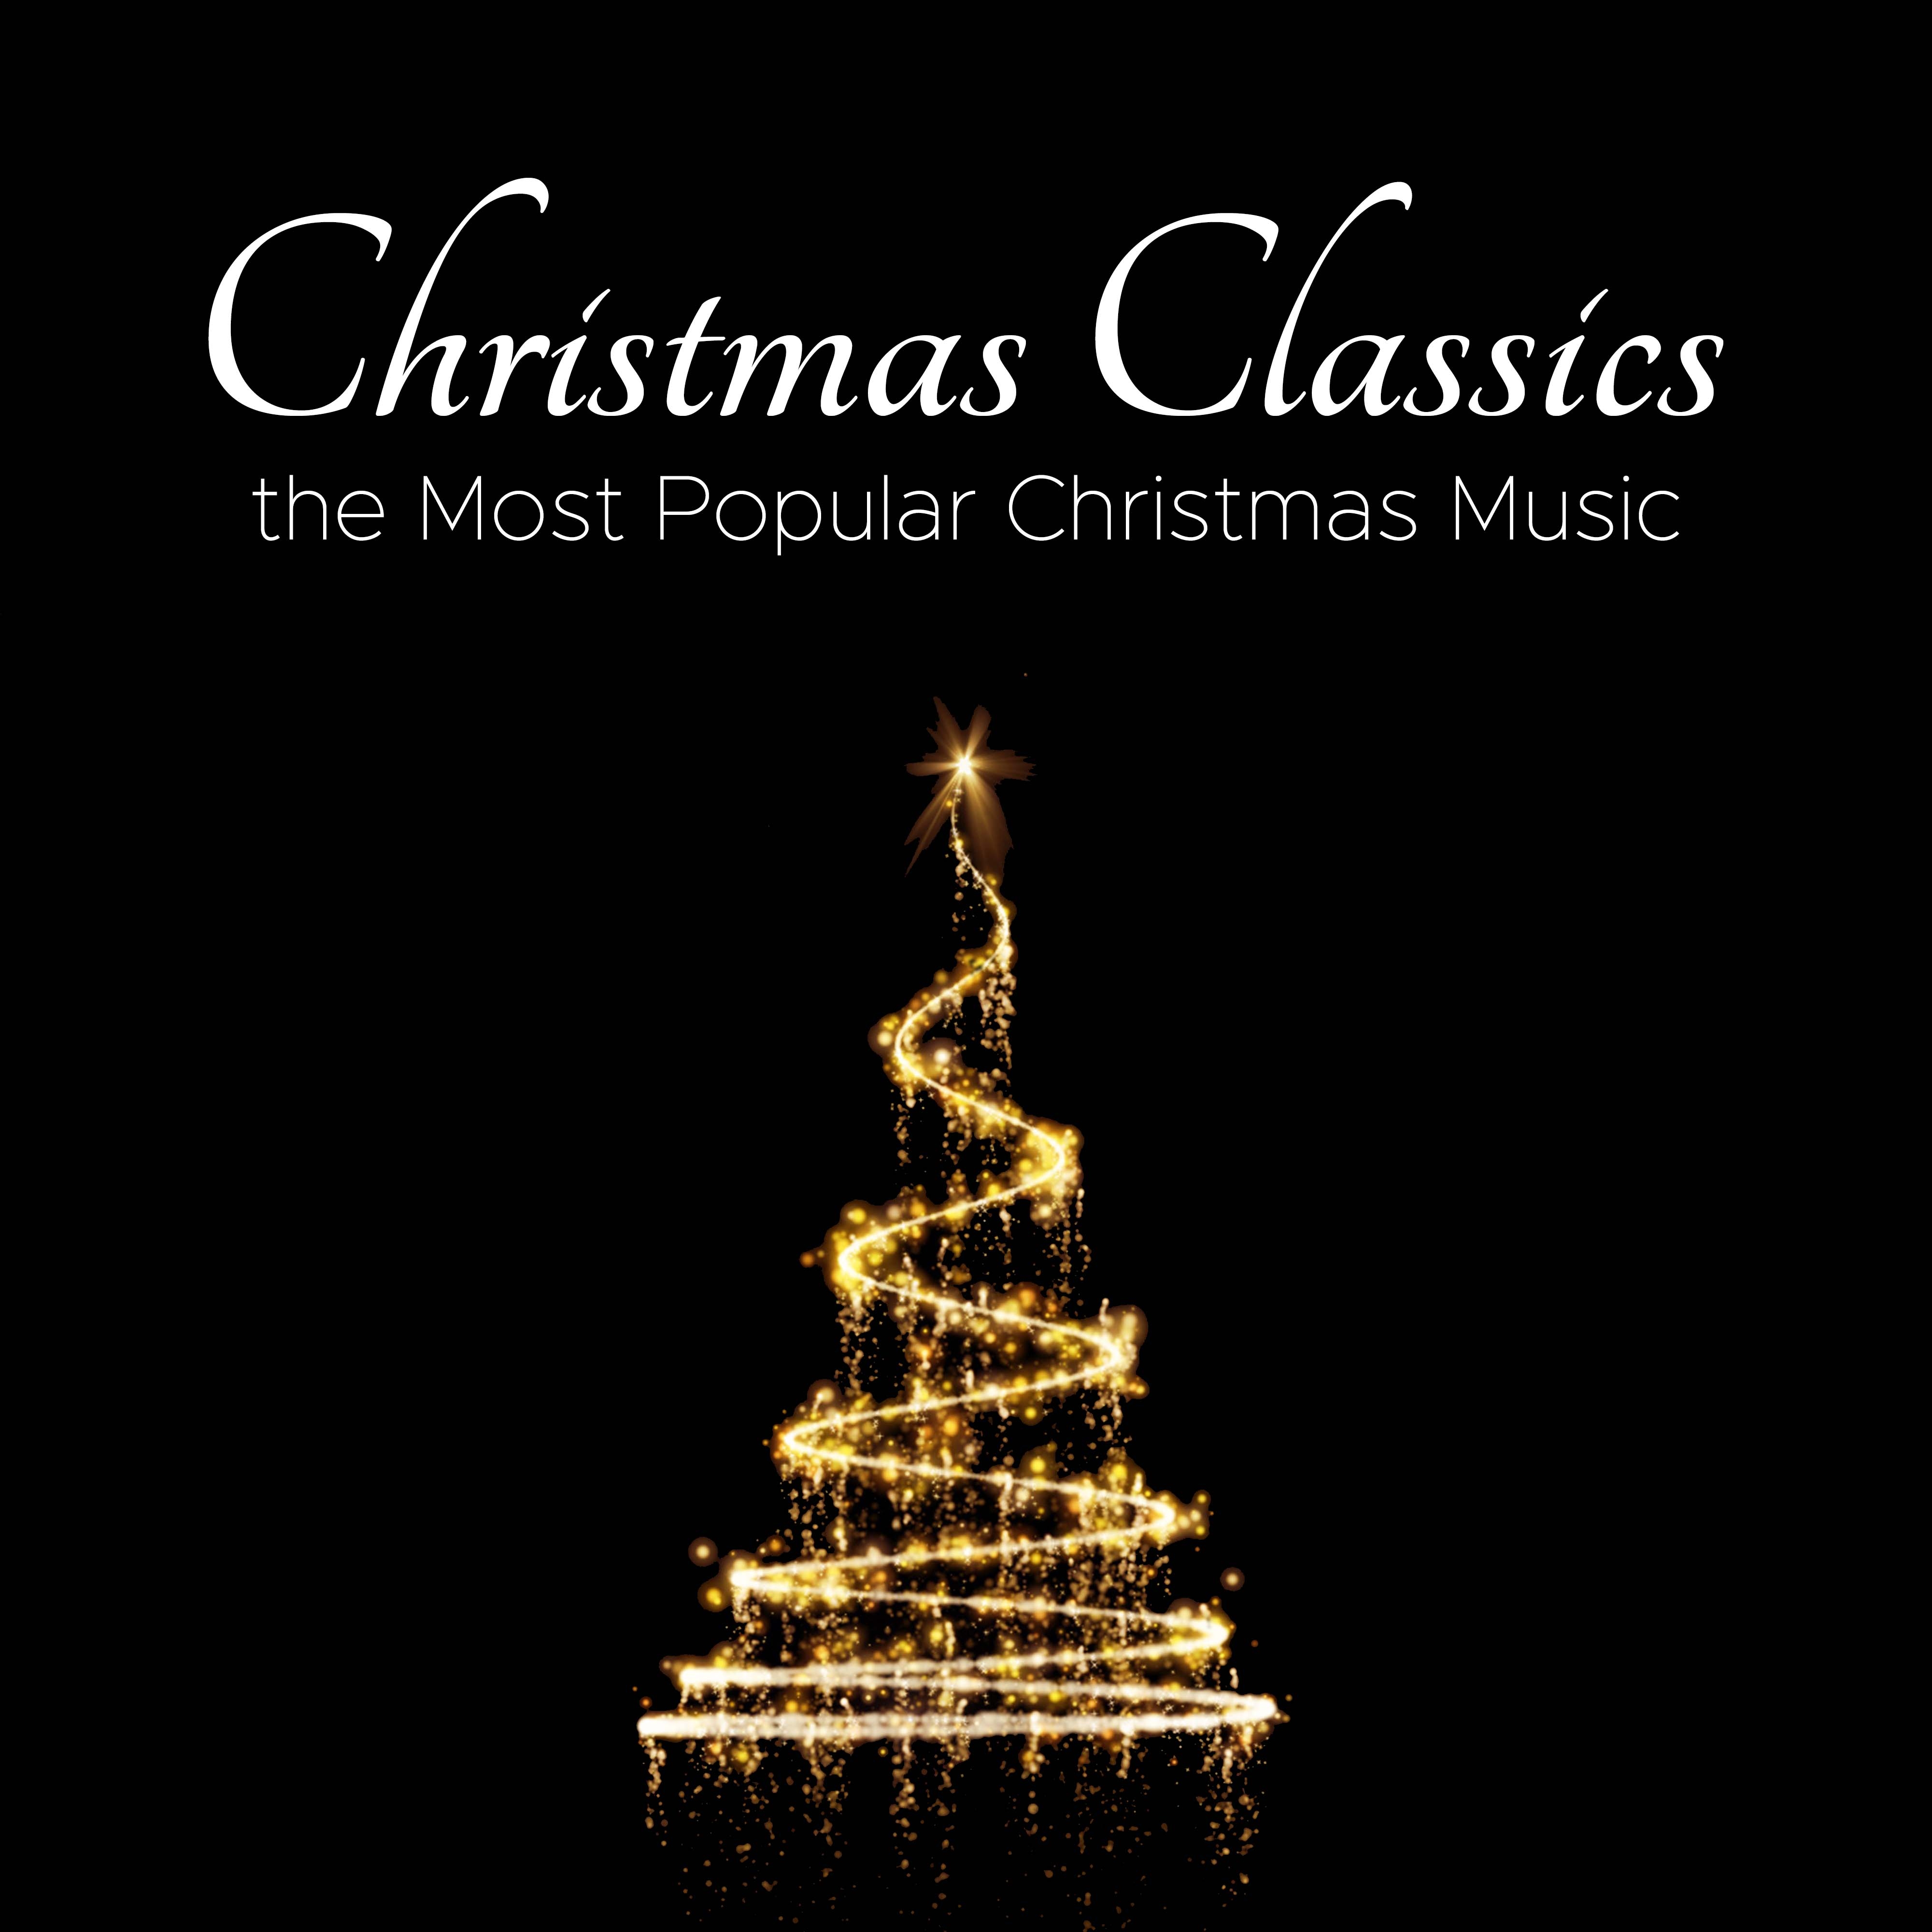 Christmas Classics - The Most Relaxing Rendition of the Most Popular Christmas Music